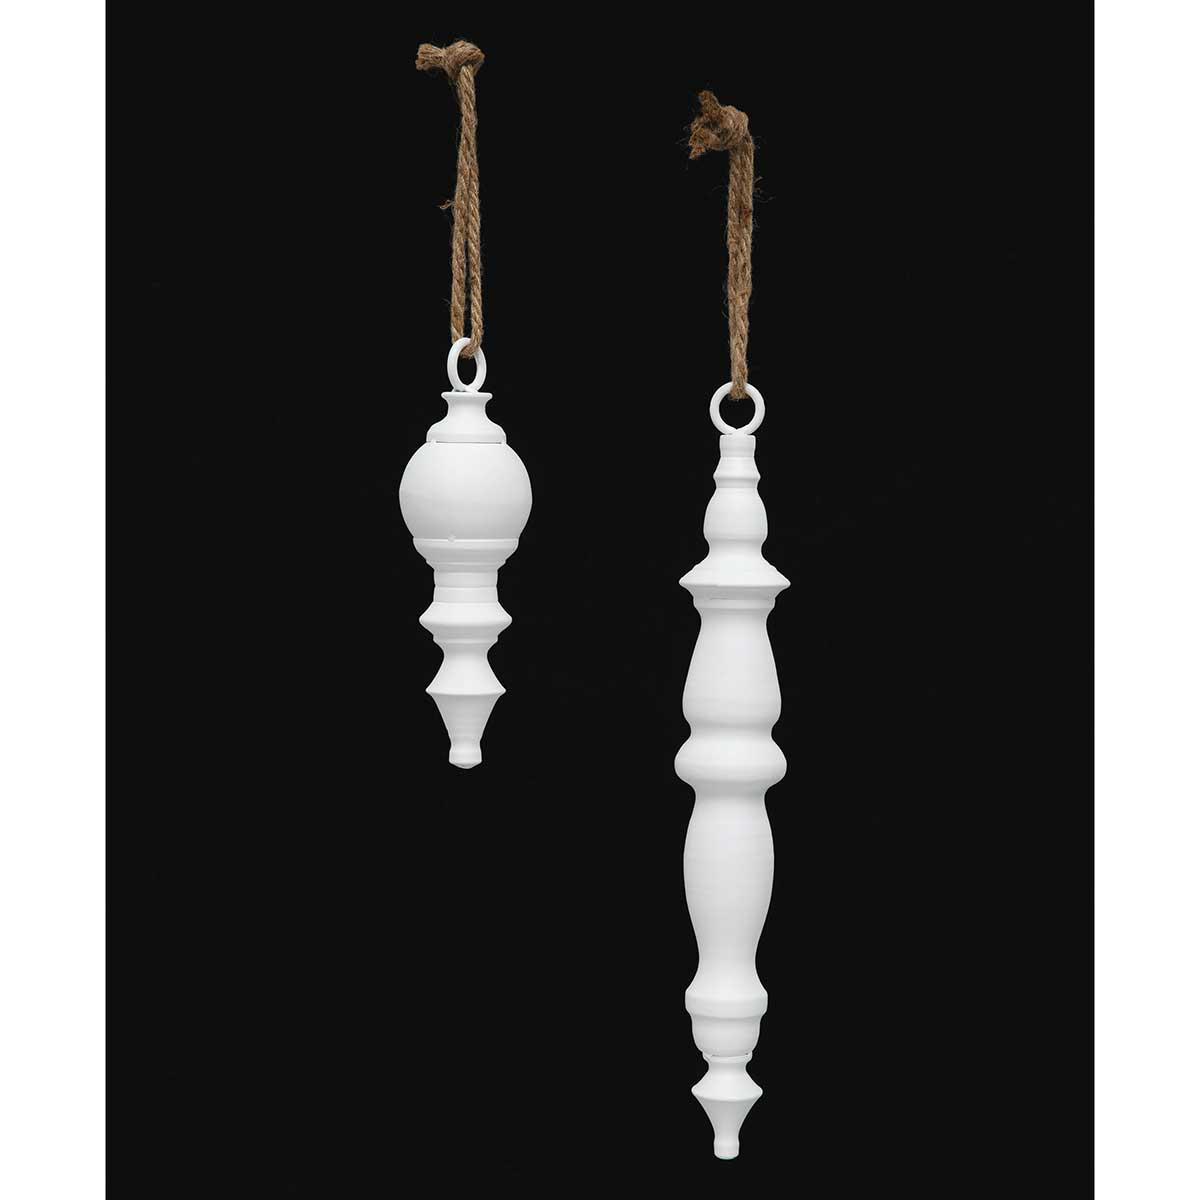 ORNAMENT FINIAL MATTE WHITE LARGE 2.5IN X 16IN METAL